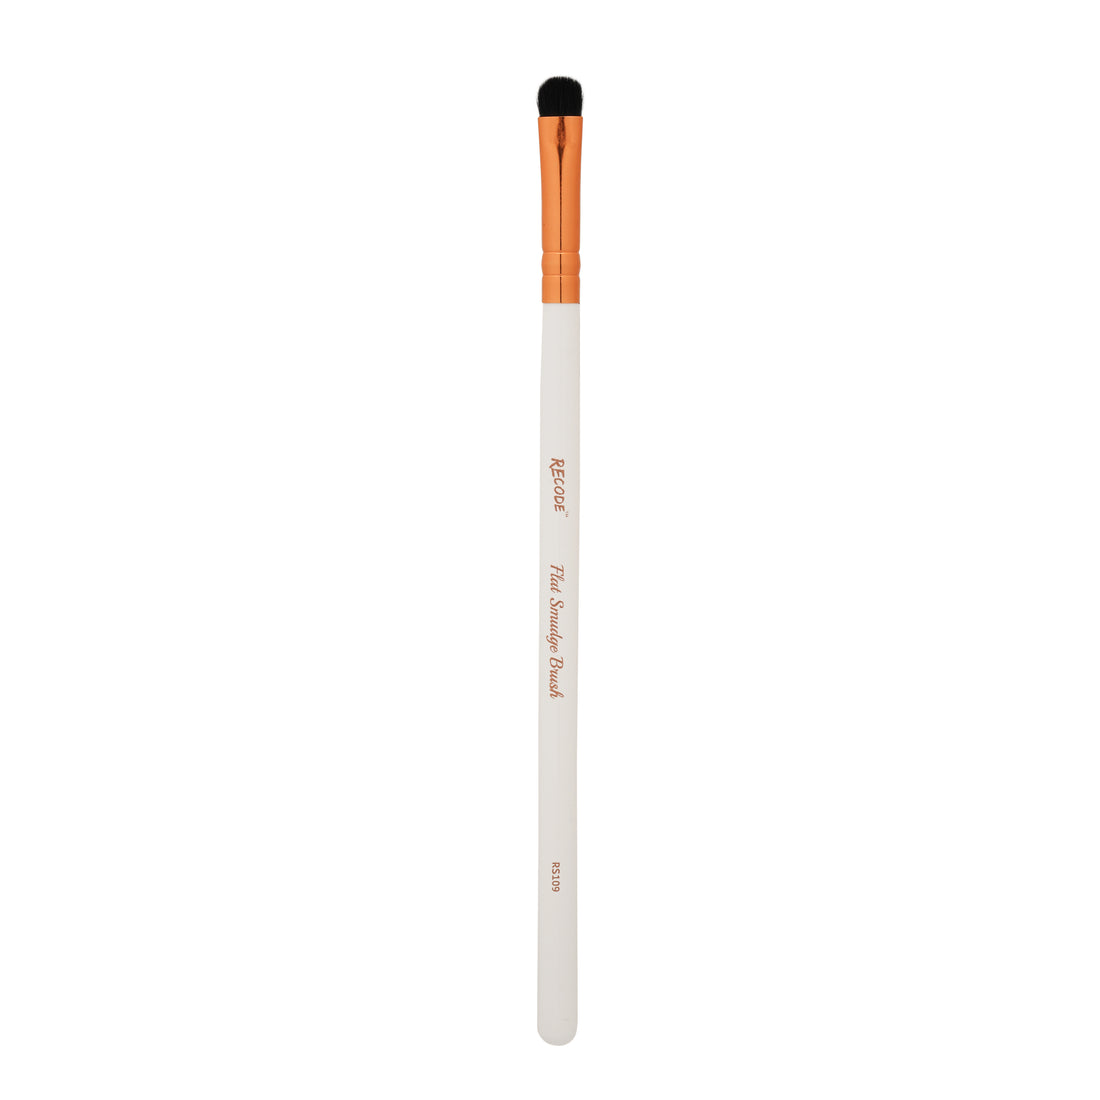 RS 109 FLAT SMUDGE/EYEBROW POWDER BRUSH - RECODE RS 109